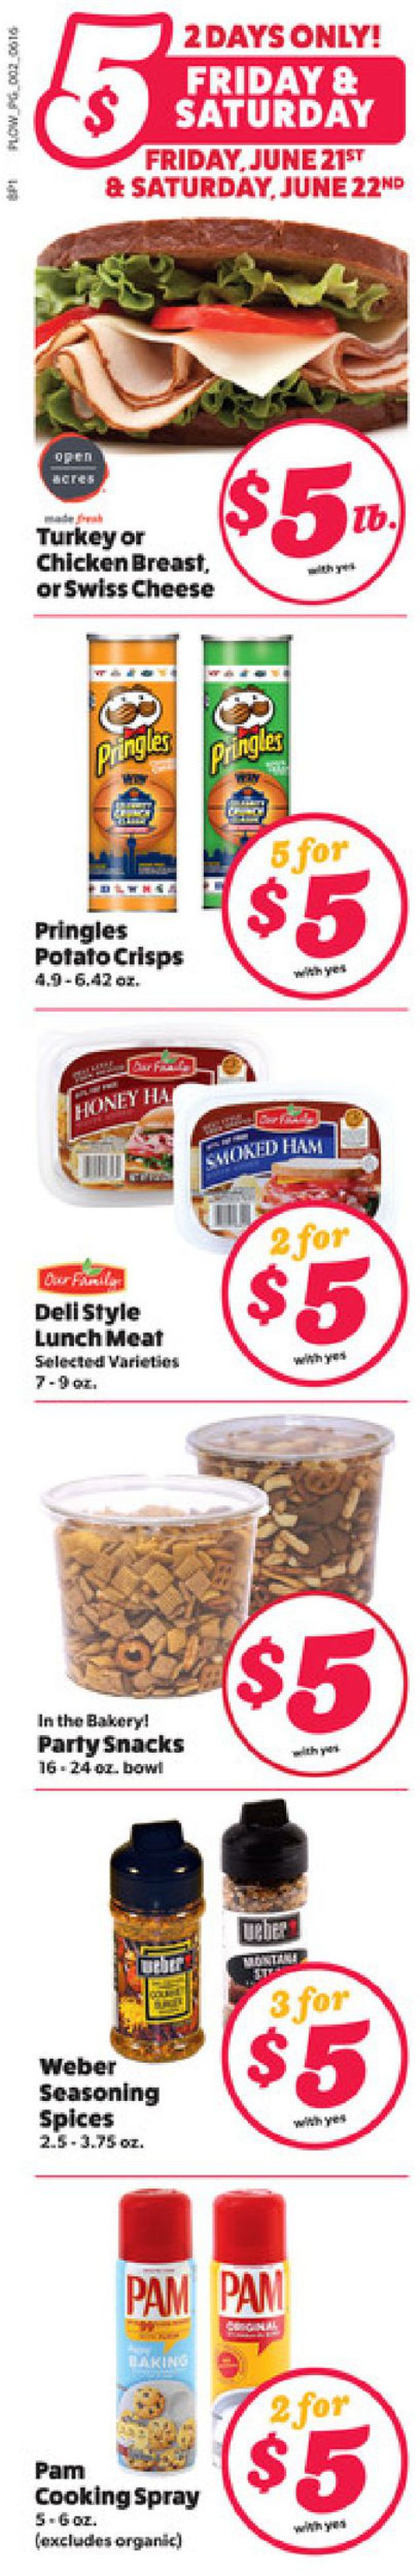 Family Fare Ad from 06/16/2019